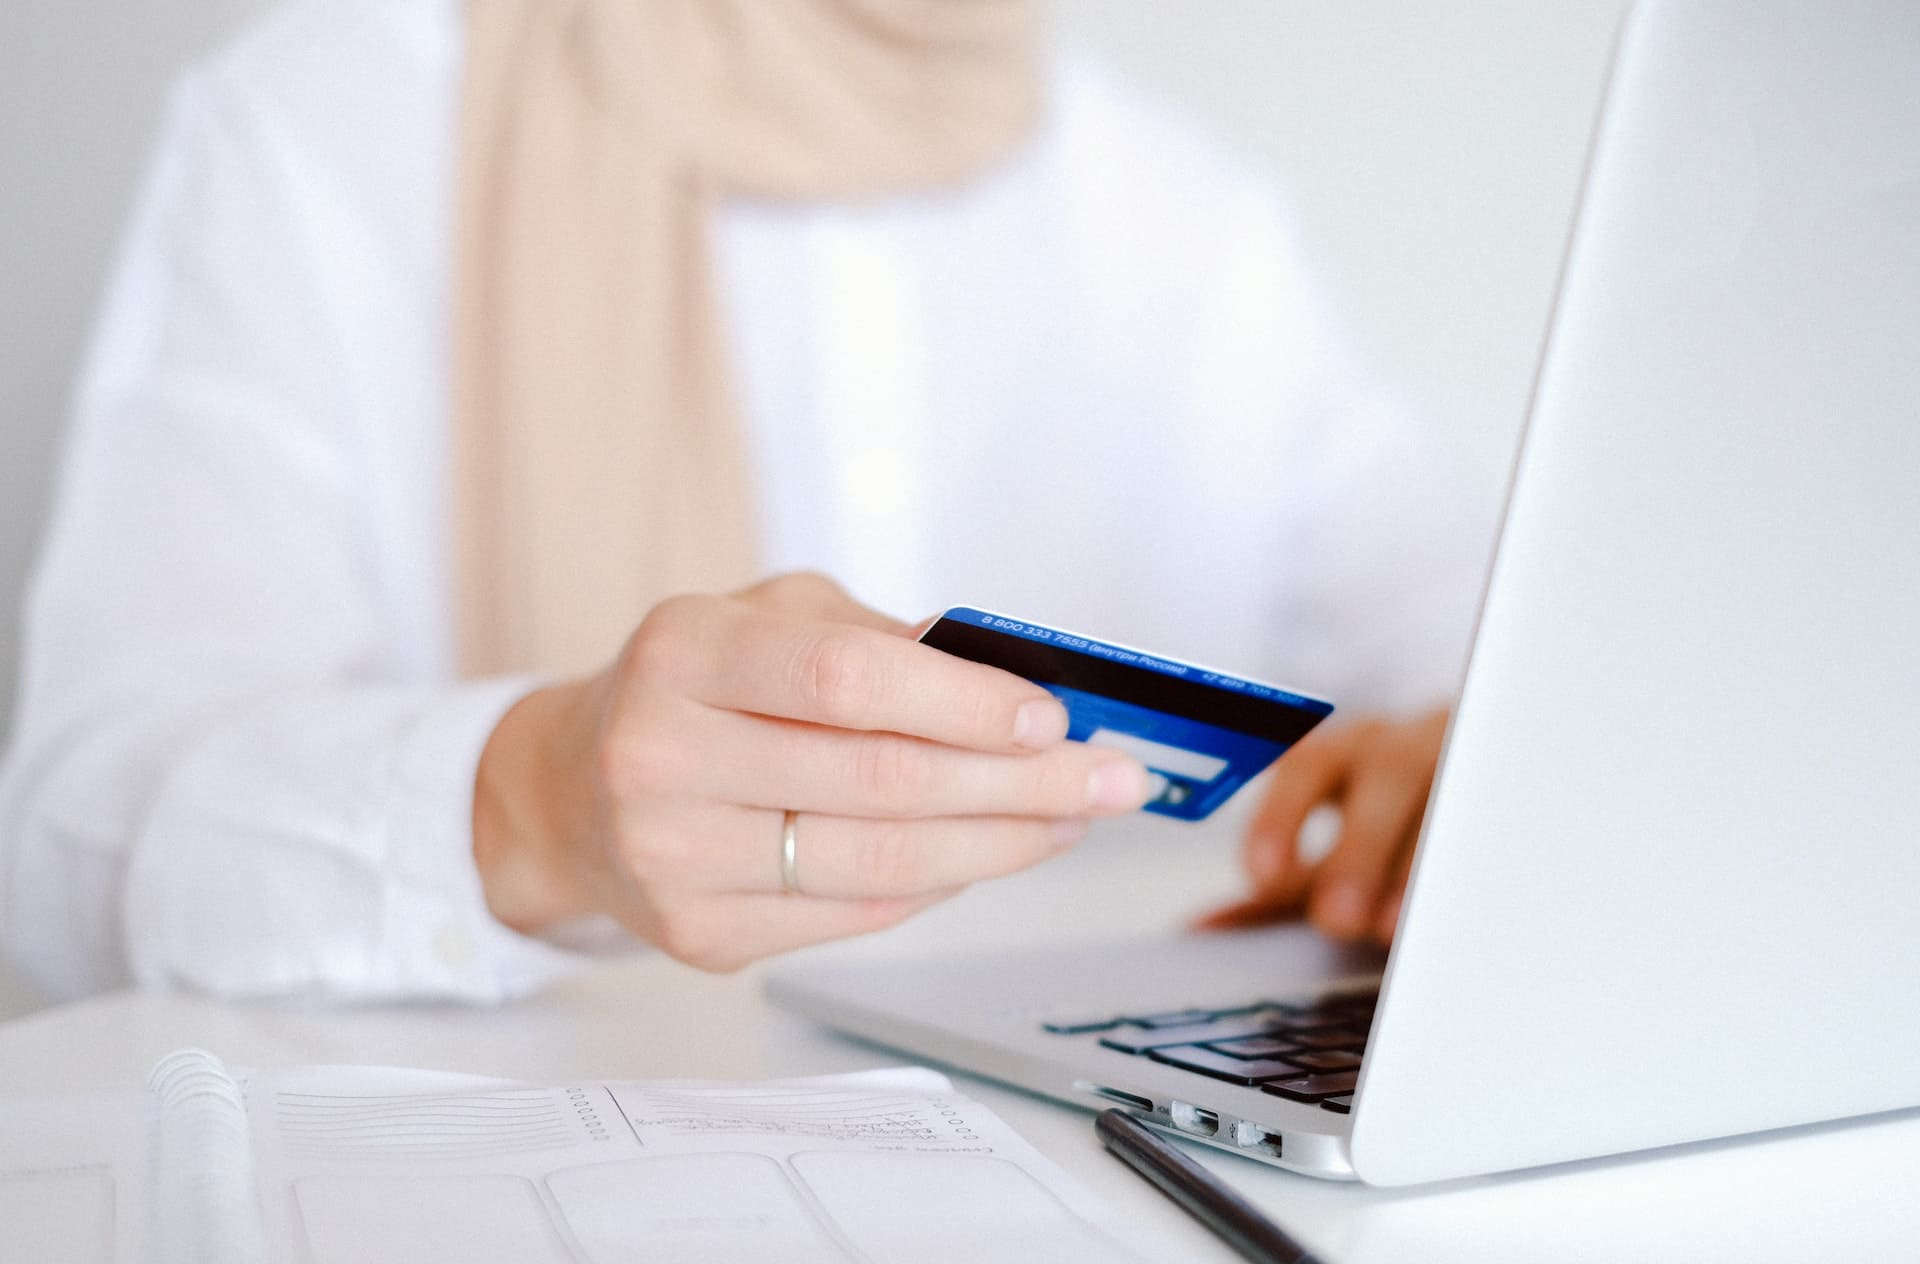 This image shows someone holding a credit card while typing on a laptop.